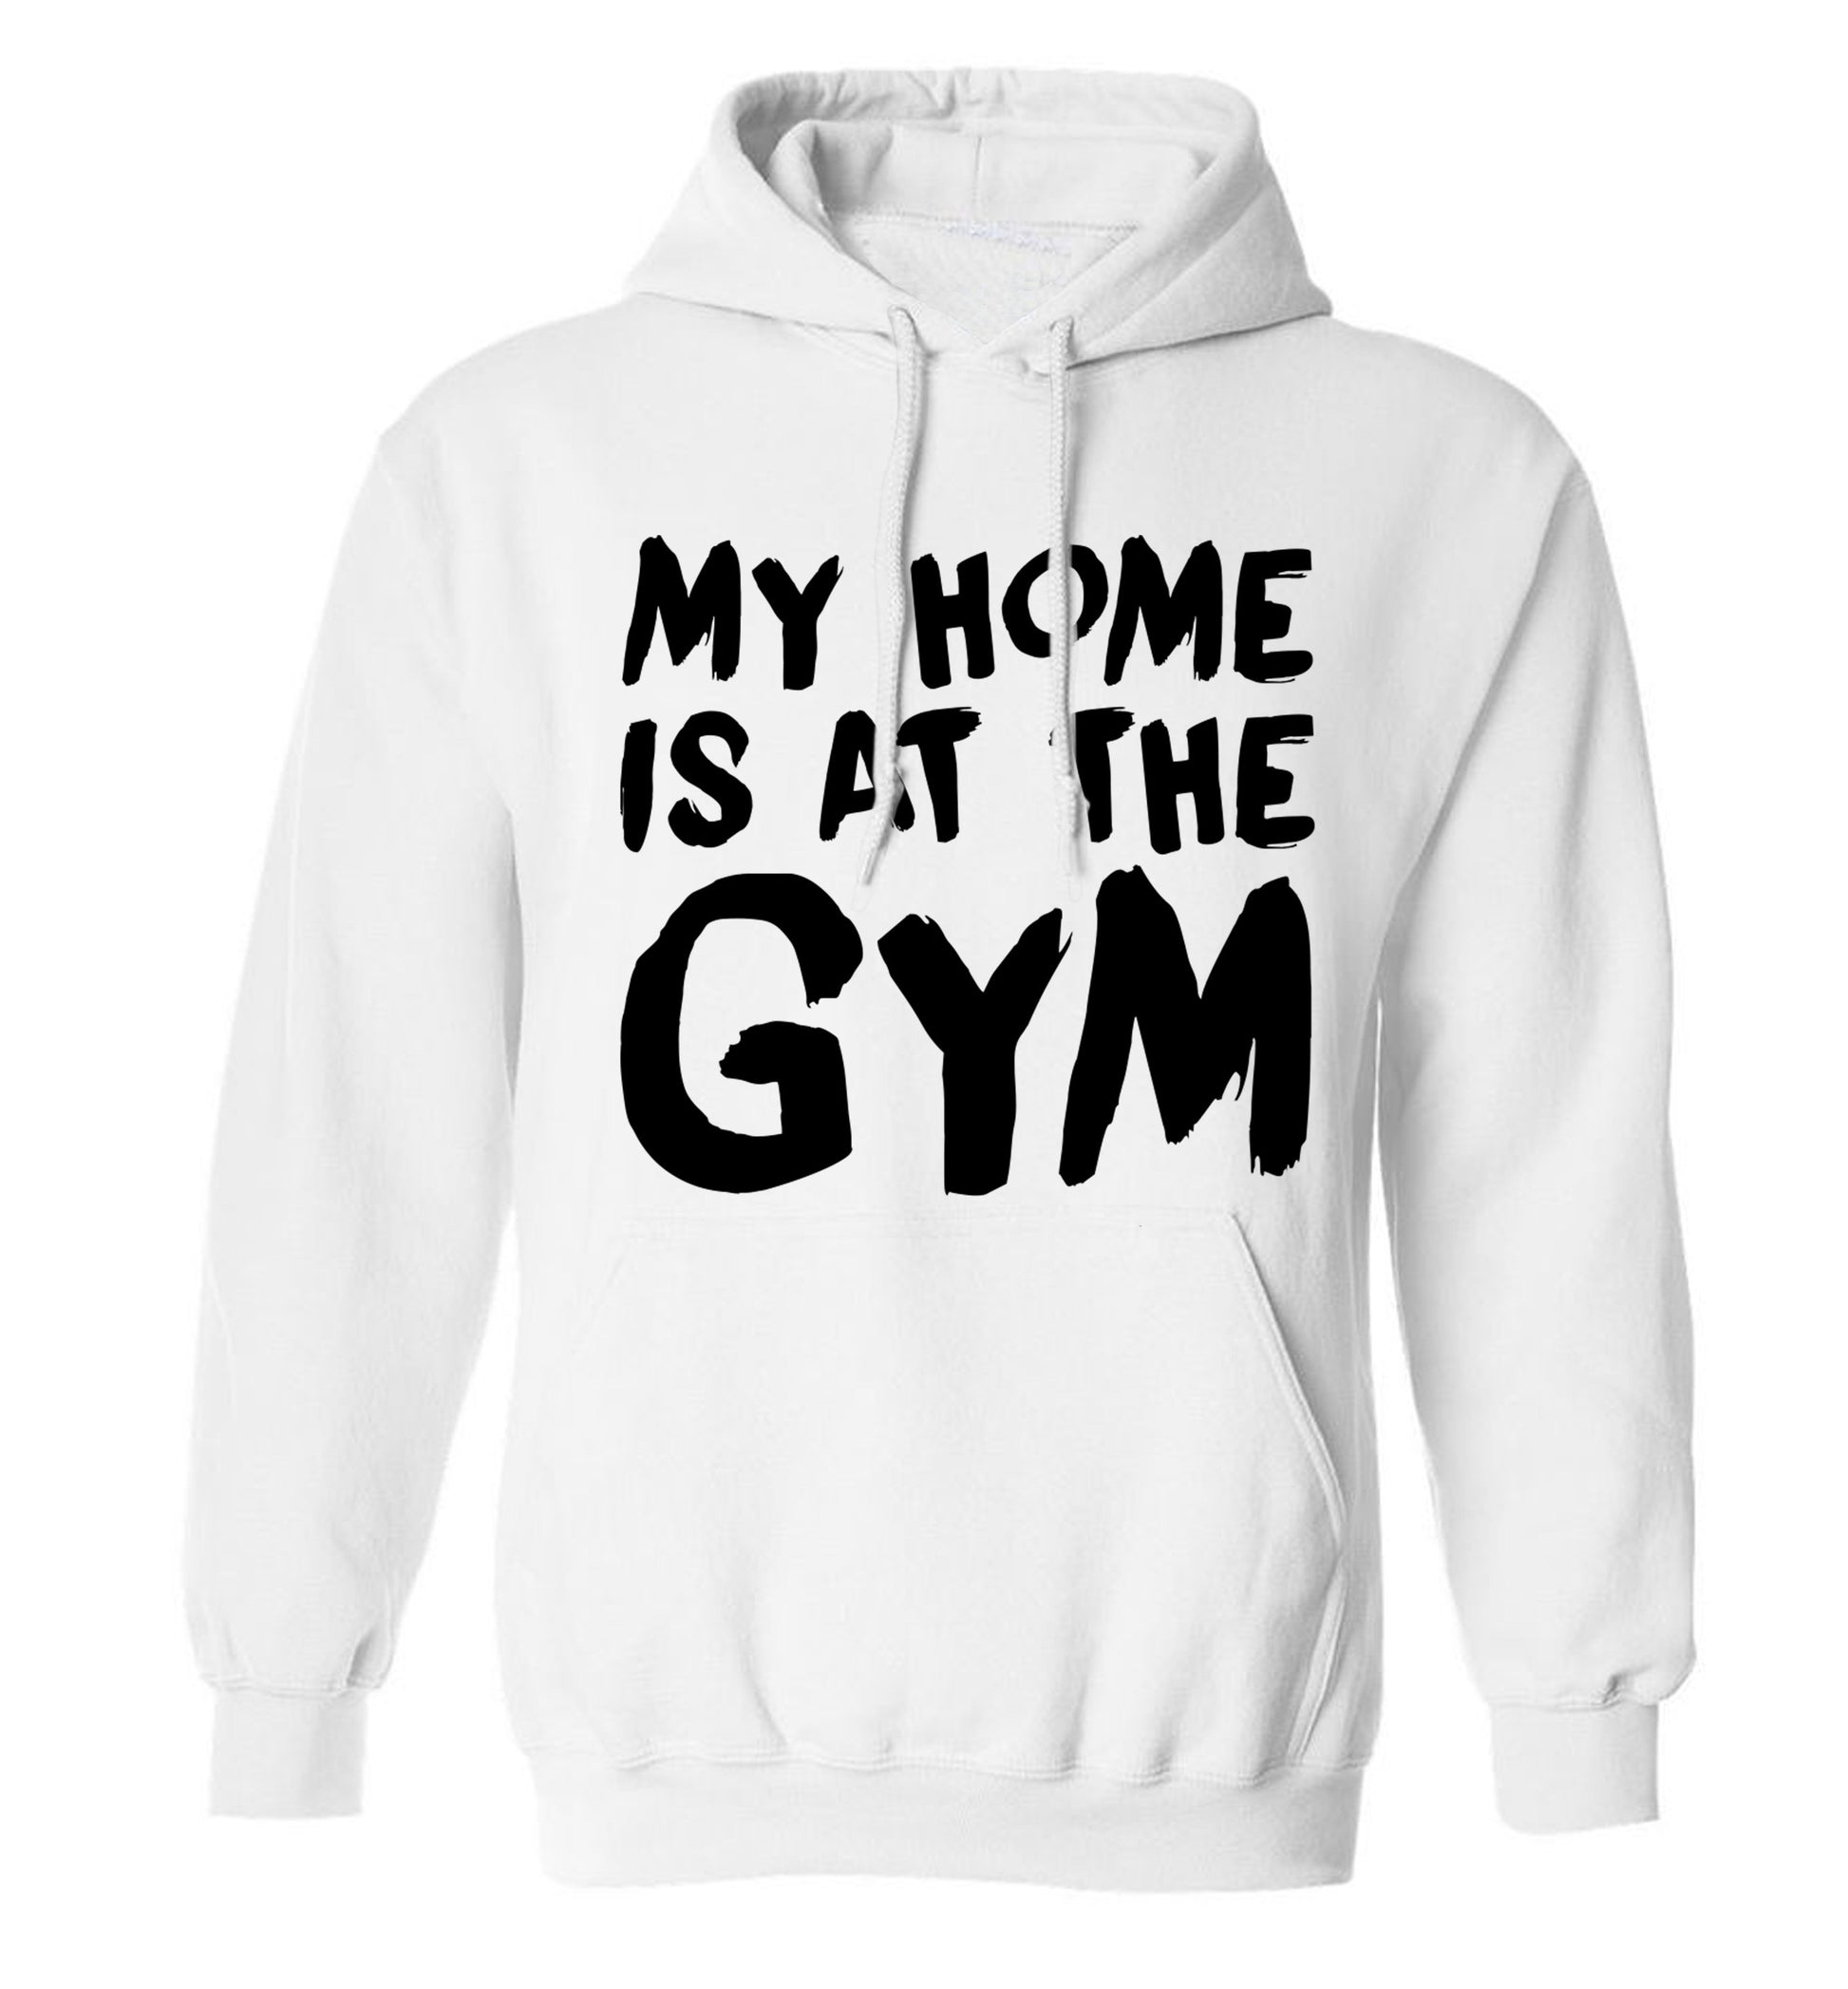 My home is at the gym adults unisex white hoodie 2XL